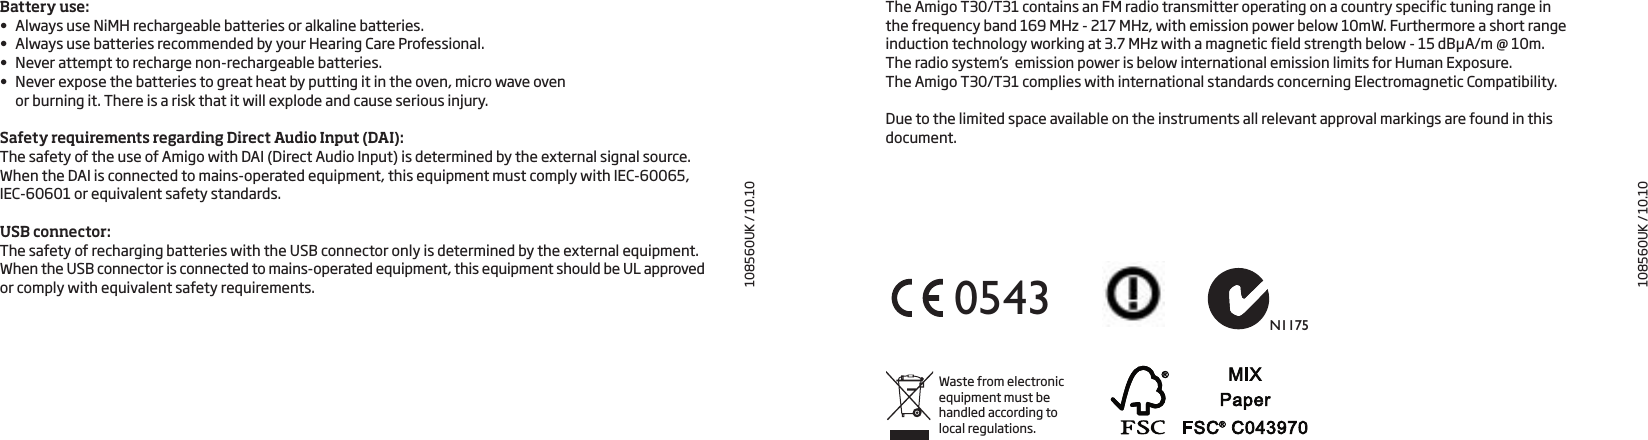 108560UK / 10.10N11750543Waste from electronic equipment must be handled according to local regulations.The Amigo T30/T31 contains an FM radio transmitter operating on a country specific tuning range in  the frequency band 169 MHz - 217 MHz, with emission power below 10mW. Furthermore a short range induction technology working at 3.7 MHz with a magnetic field strength below - 15 dBµA/m @ 10m.  The radio system’s  emission power is below international emission limits for Human Exposure.  The Amigo T30/T31 complies with international standards concerning Electromagnetic Compatibility. Due to the limited space available on the instruments all relevant approval markings are found in this document.108560UK / 10.10Battery use:•  Always use NiMH rechargeable batteries or alkaline batteries.•  Always use batteries recommended by your Hearing Care Professional.•  Never attempt to recharge non-rechargeable batteries. •  Never expose the batteries to great heat by putting it in the oven, micro wave oven  or burning it. There is a risk that it will explode and cause serious injury.  Safety requirements regarding Direct Audio Input (DAI):The safety of the use of Amigo with DAI (Direct Audio Input) is determined by the external signal source. When the DAI is connected to mains-operated equipment, this equipment must comply with IEC-60065, IEC-60601 or equivalent safety standards.USB connector:The safety of recharging batteries with the USB connector only is determined by the external equipment. When the USB connector is connected to mains-operated equipment, this equipment should be UL approved or comply with equivalent safety requirements. 